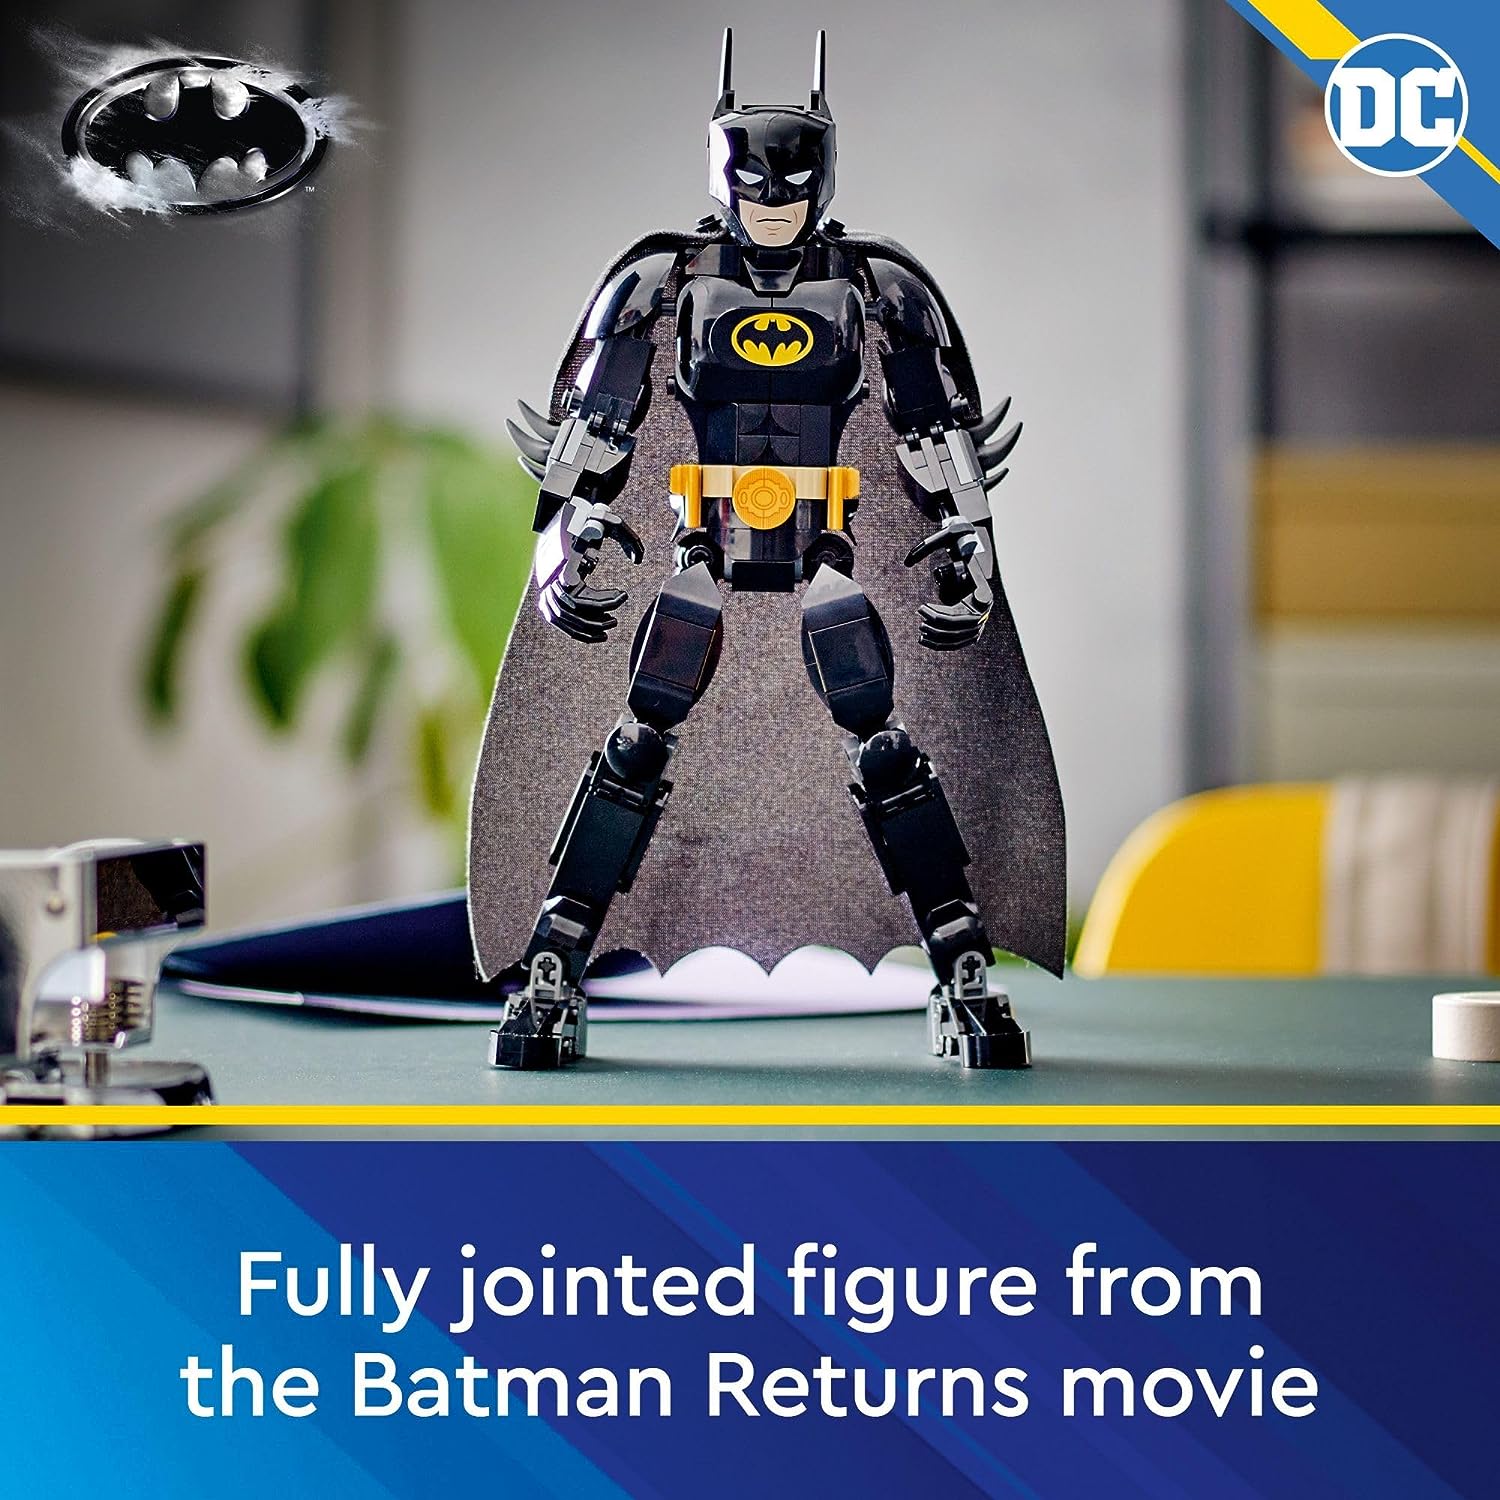 LEGO 76259 DC Batman Construction Figure Buildable DC Action Figure, Fully Jointed DC Toy for Play and Display with Cape and Authentic Details from the Batman Returns Movie